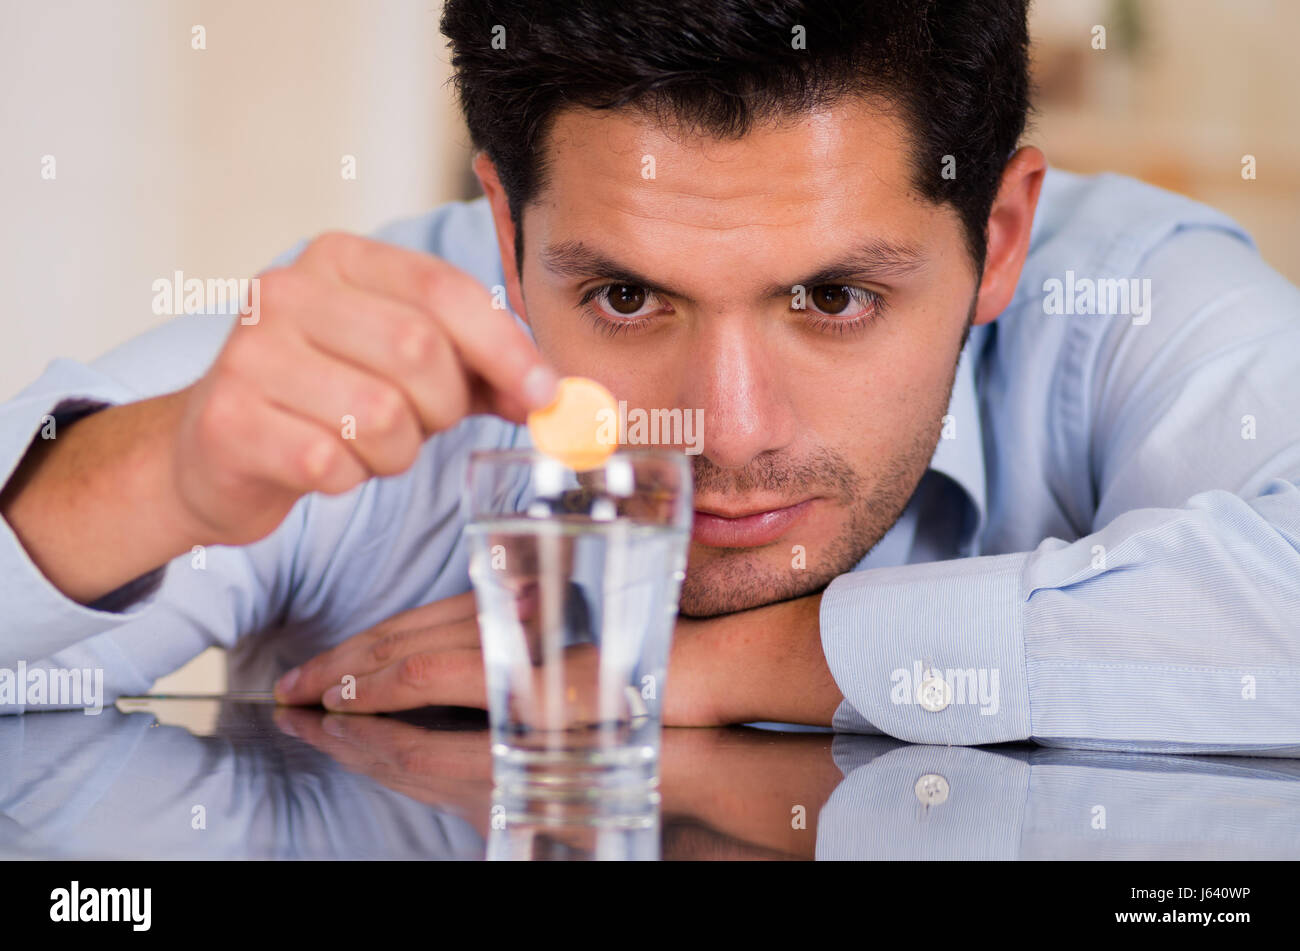 Handsome man dropping effervescent tablet in glass of water Stock Photo